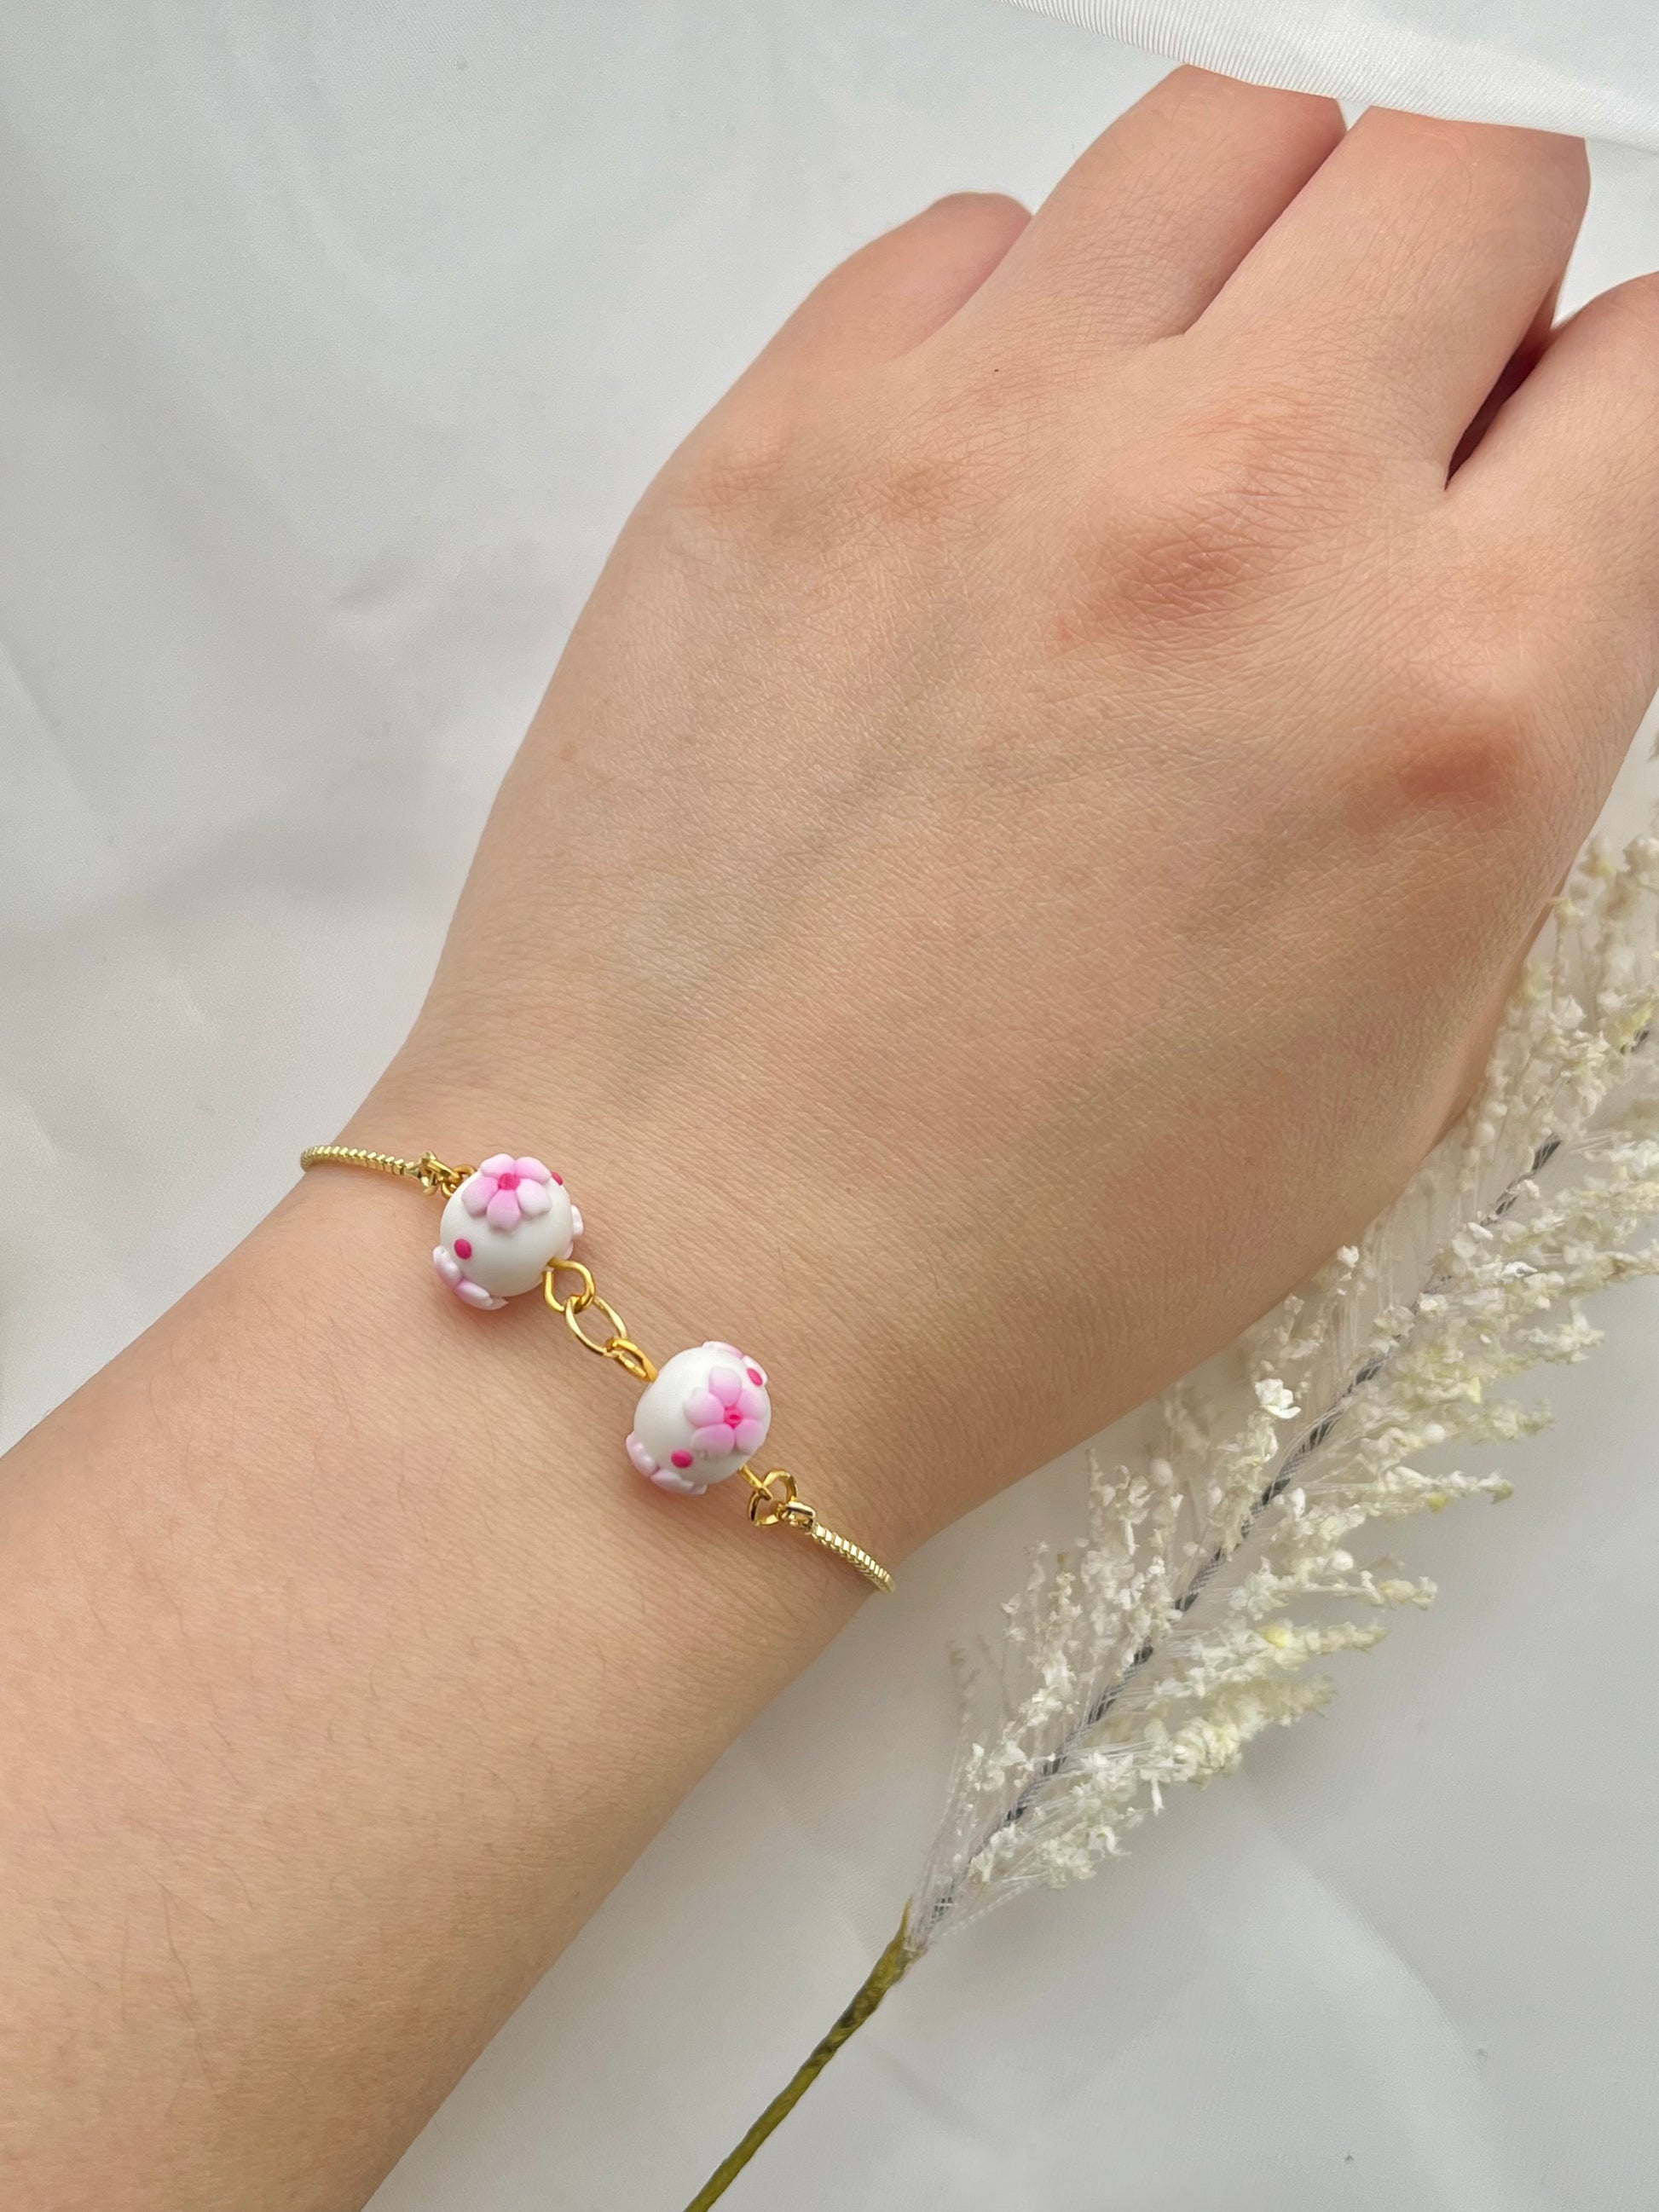 A floral bracelet in cherry blossom style with 2 beads on a hand